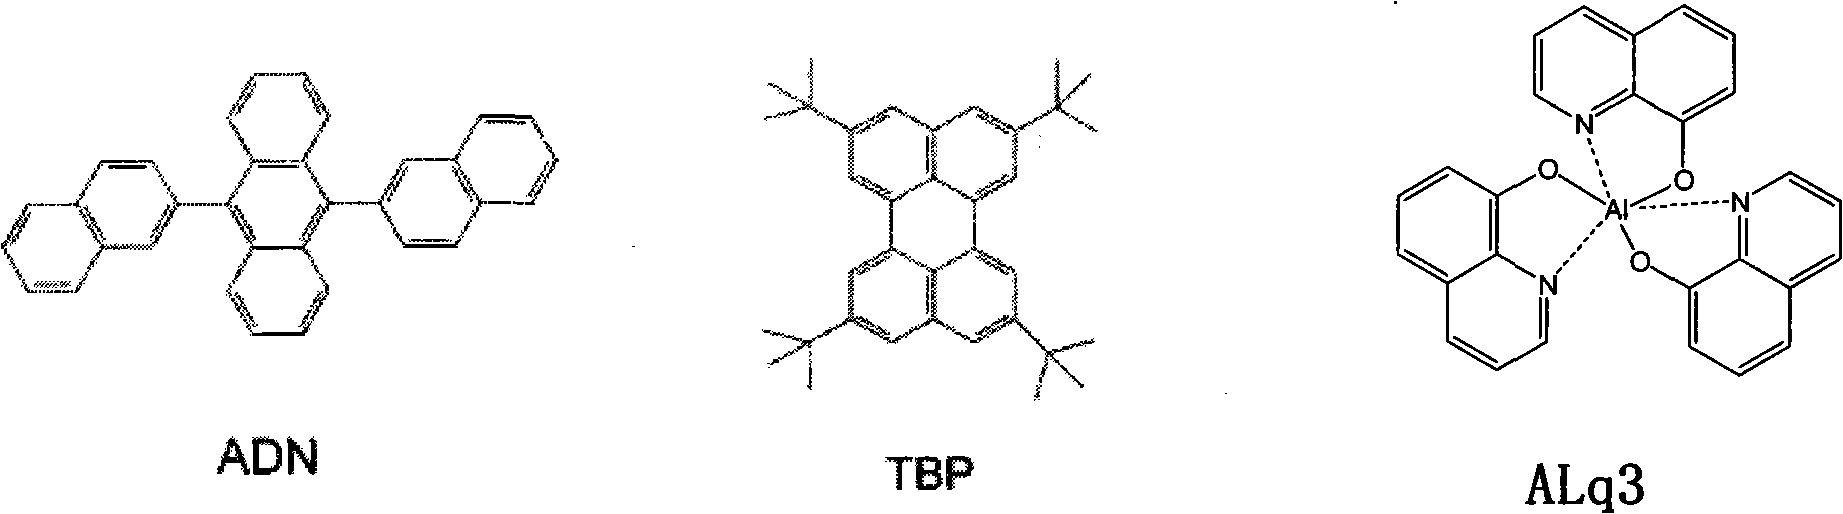 Organic electron transport and/or hole blocking material and its synthesis method and use